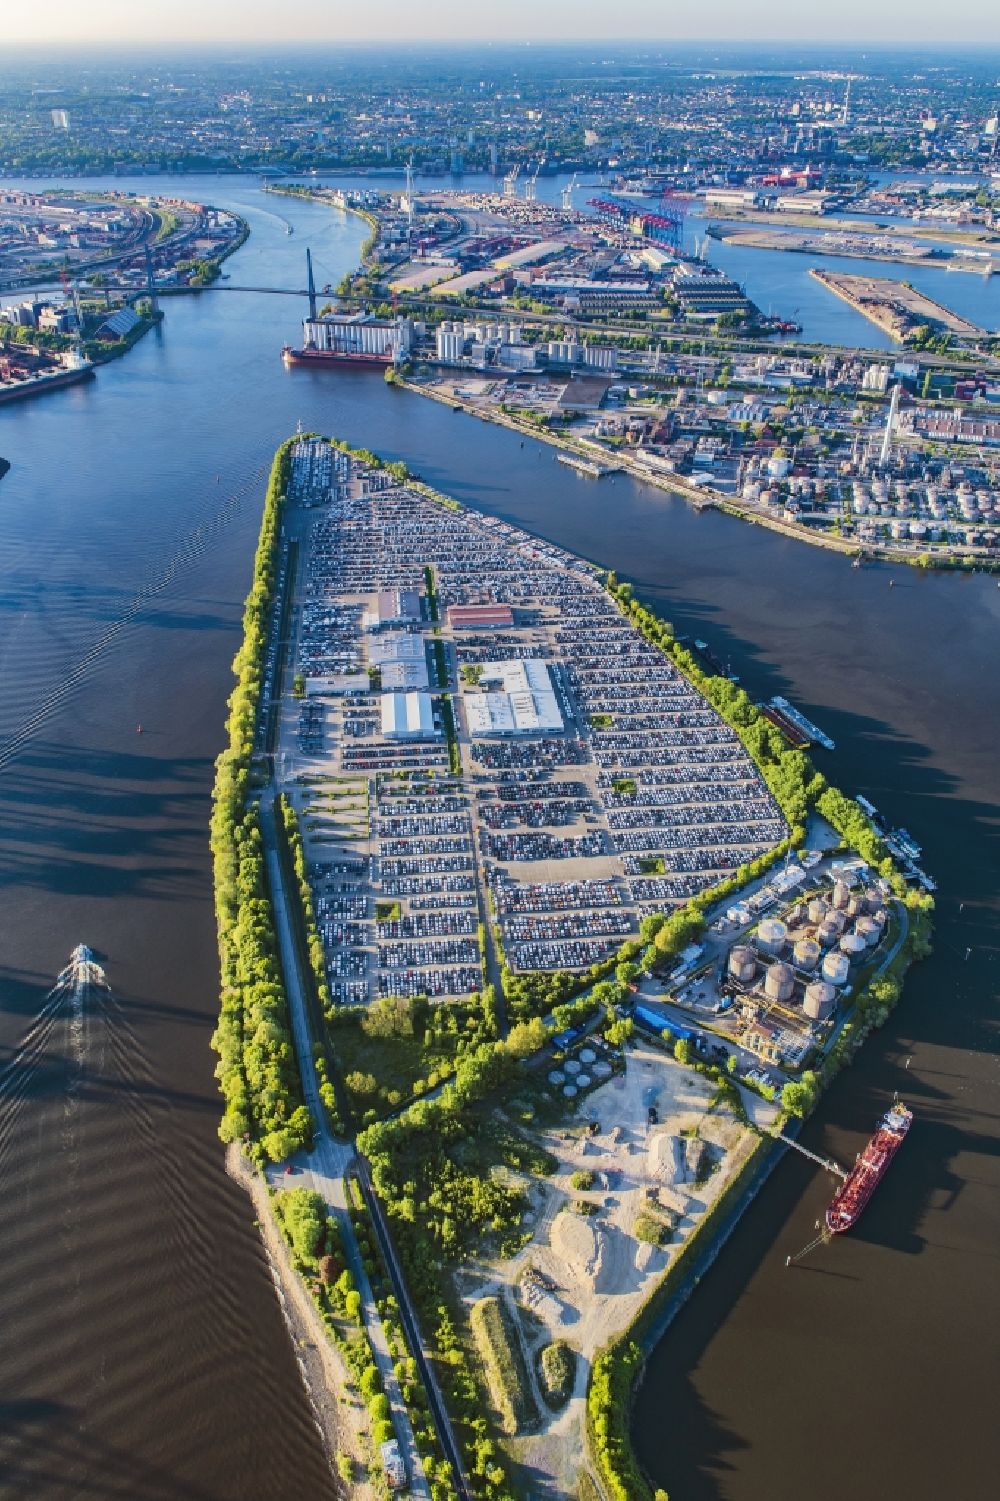 Aerial image Hamburg - Premises of the distribution center of BLG Autoterminal Hamburg Gmbh&Co.KG with parking lots on the Kattwyk peninsula in Hamburg in Germany. The peninsula is located between Rethe and South Elbe rivers and in front of the borough of Altenwerder